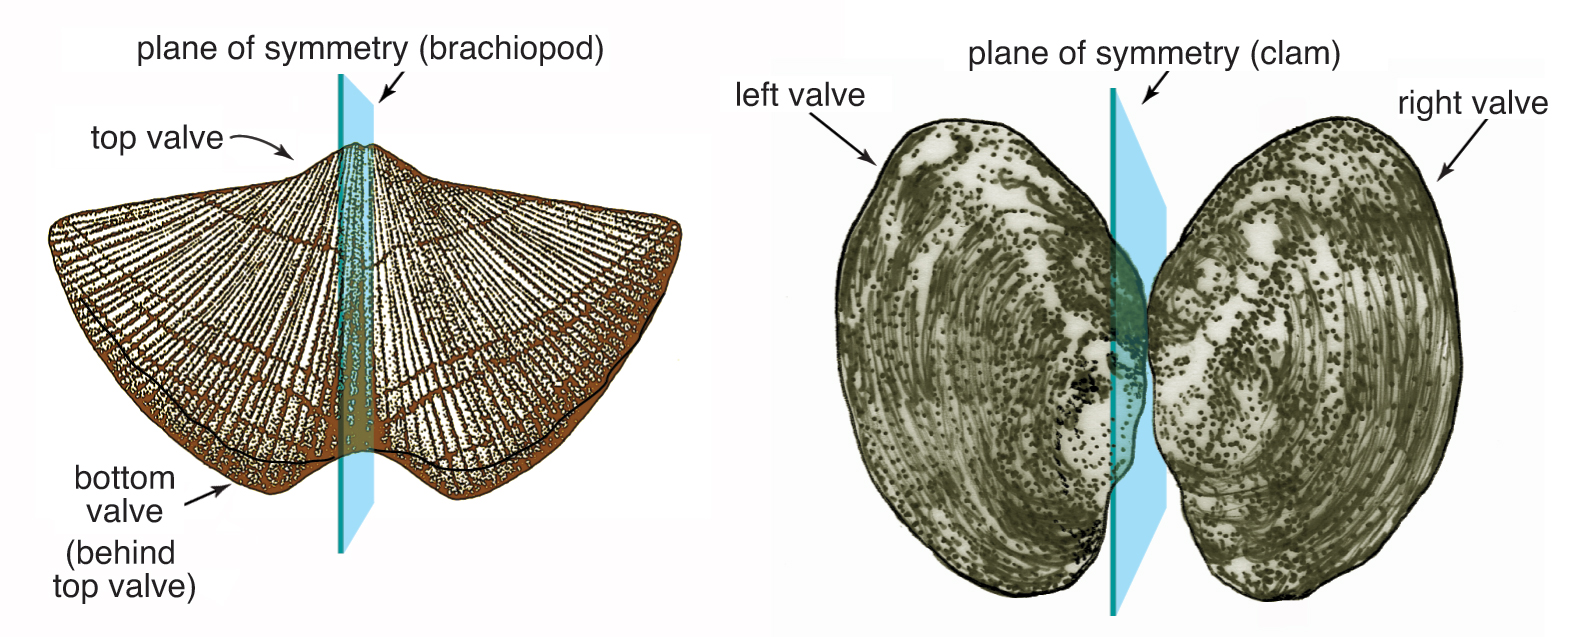 Contrasting symmetries in brachiopods and clams.